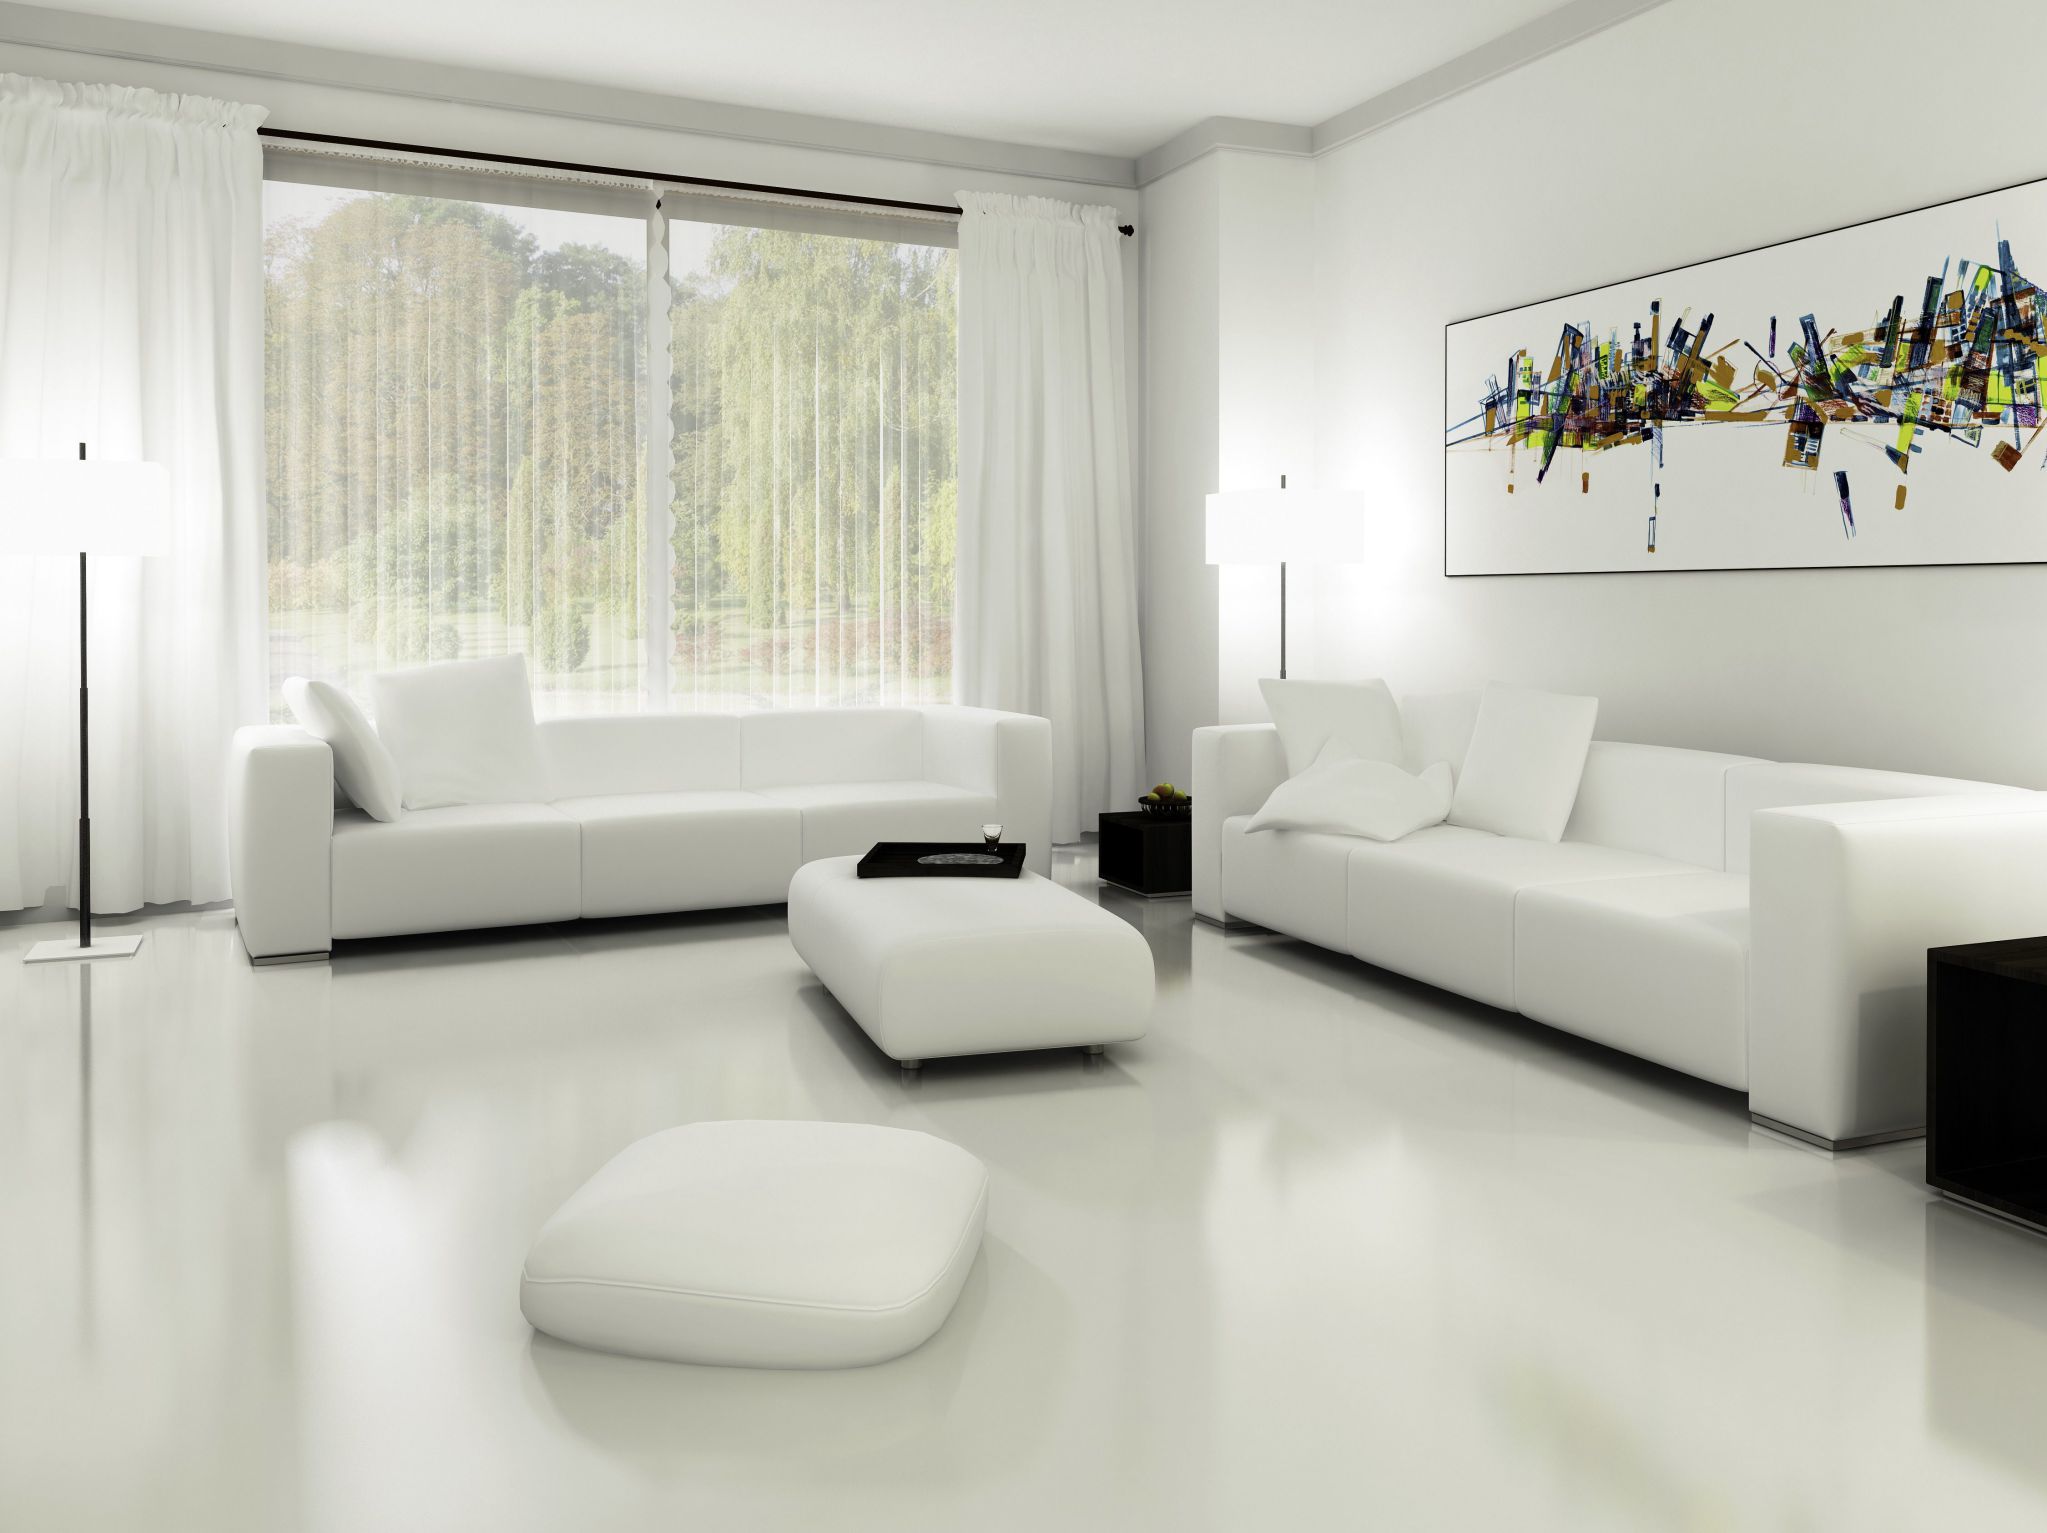 White Living Included Heavenly White Living Room Ideas Included By Ottoman Table Just Around Sofa Set Ideas Living Room White Living Room Ideas With Calm And Relaxing Nuance